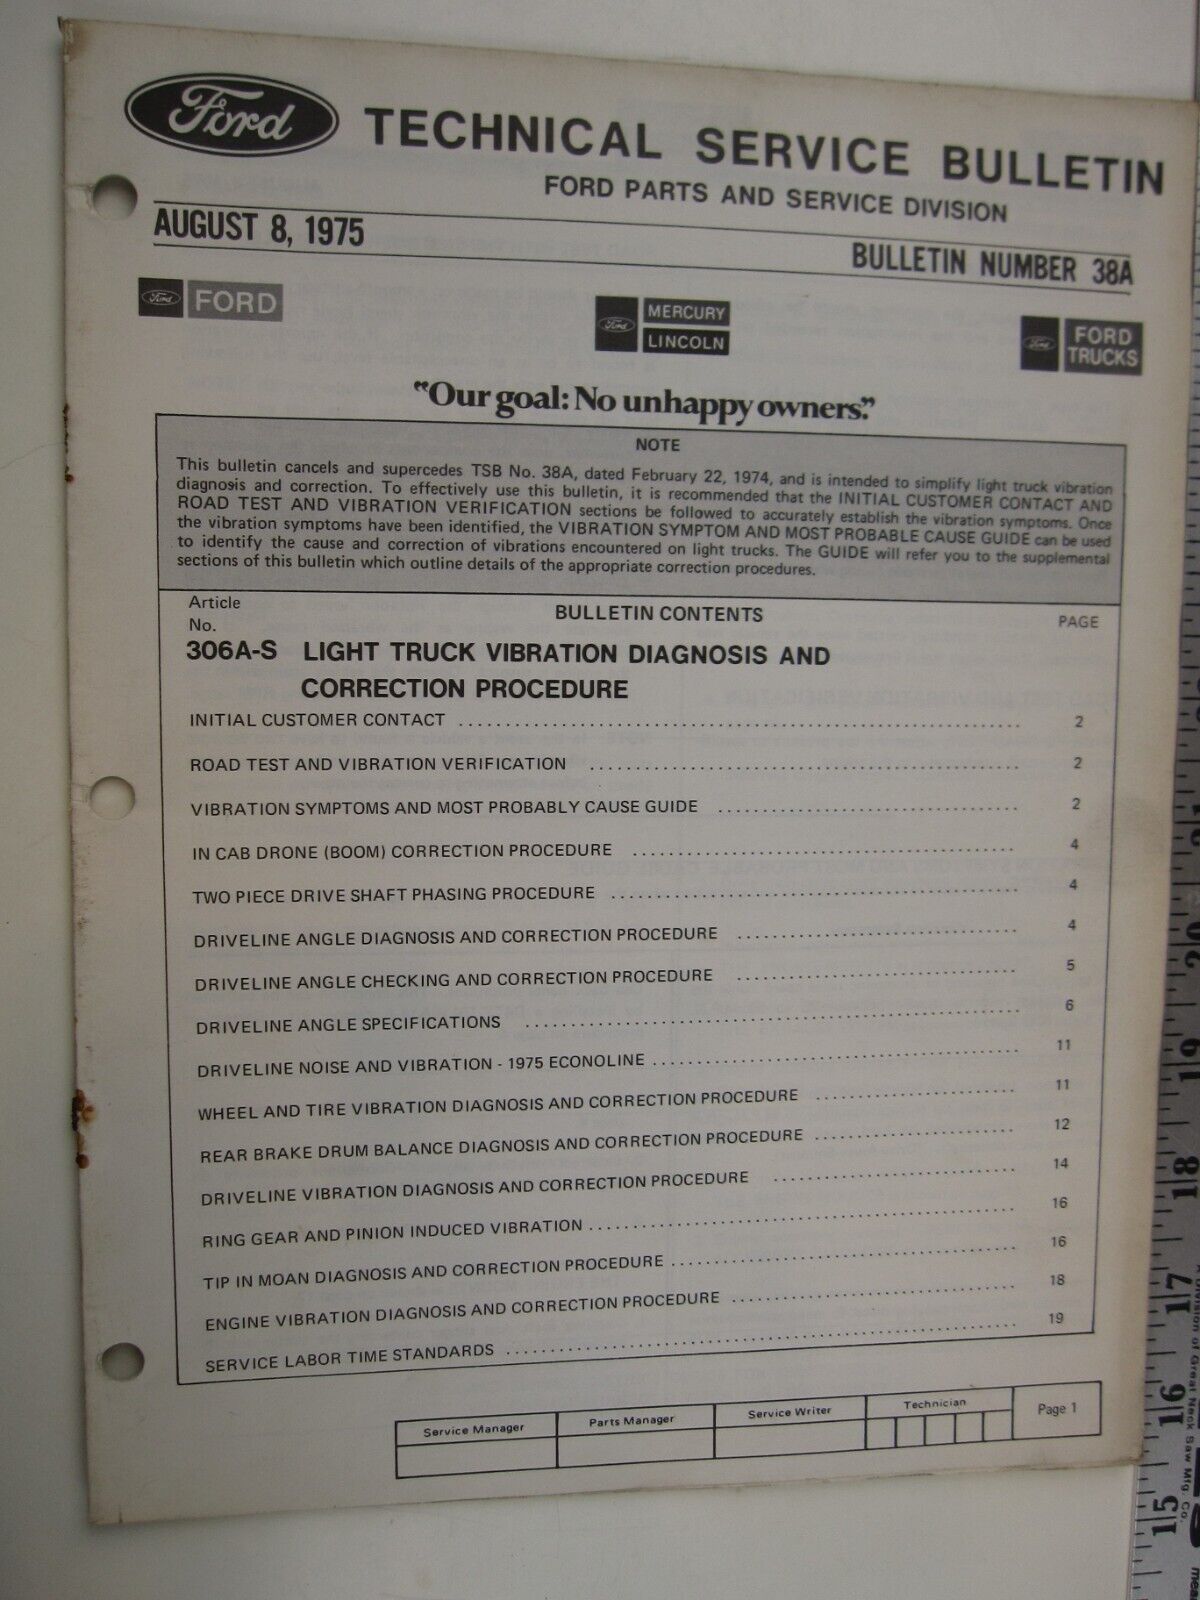 August 8, 1975 FORD Technical Service Bulletin Number 38A  BIS